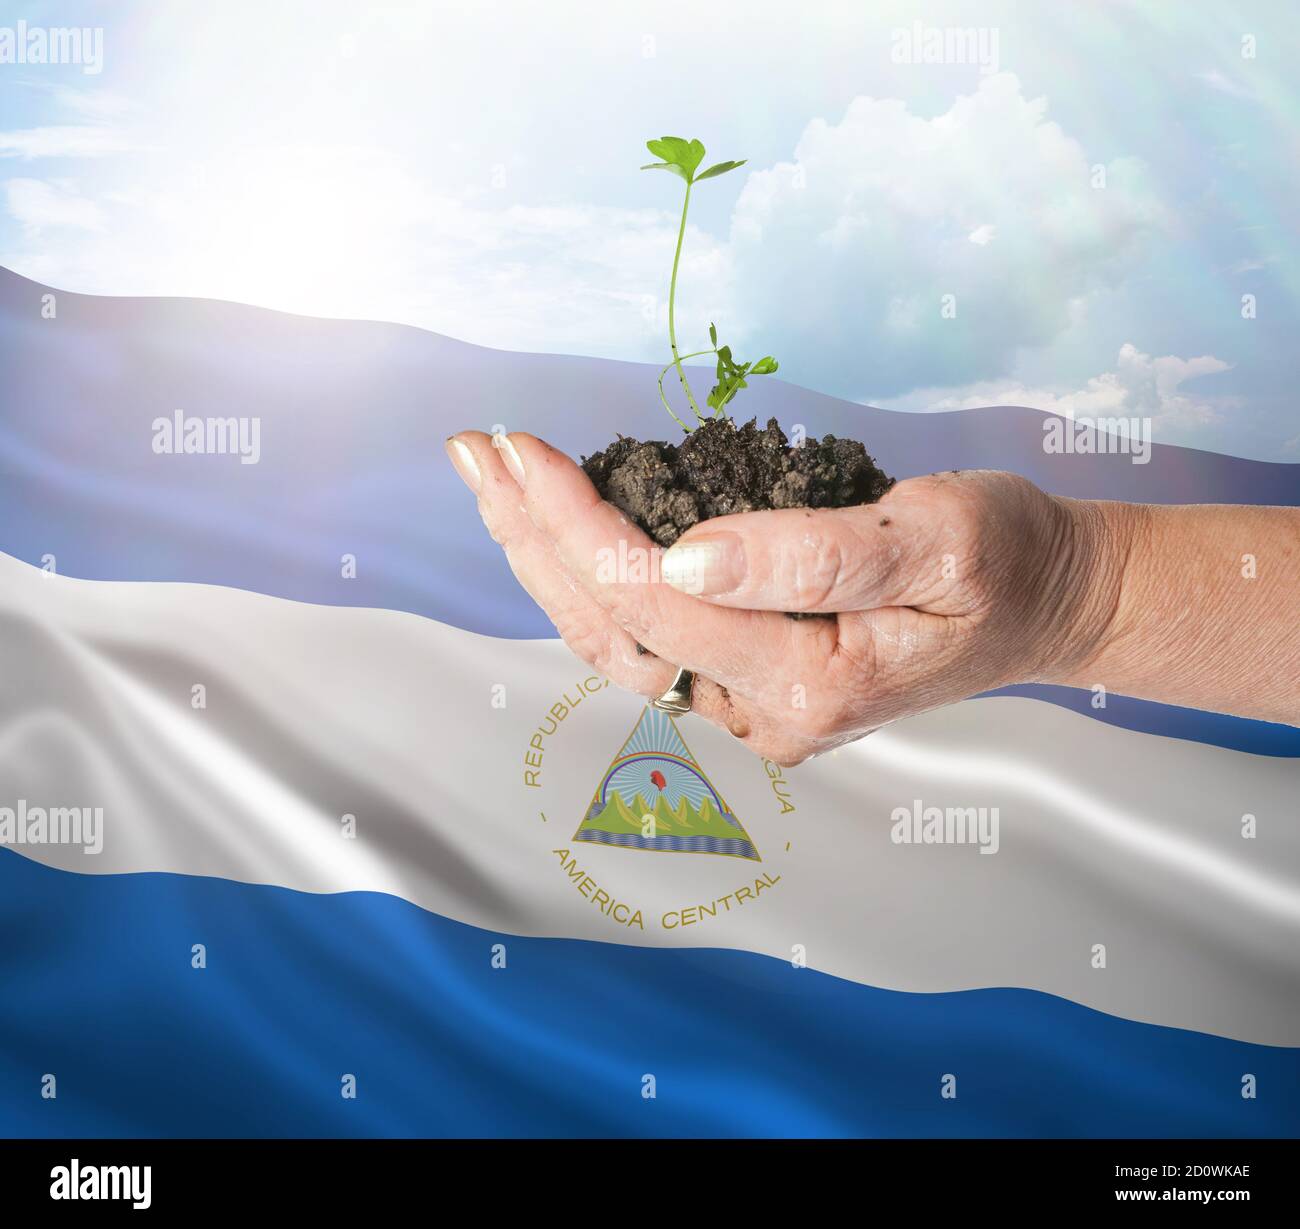 Nicaragua growth and new beginning. Green renewable energy and ecology concept. Hand holding young plant. Stock Photo